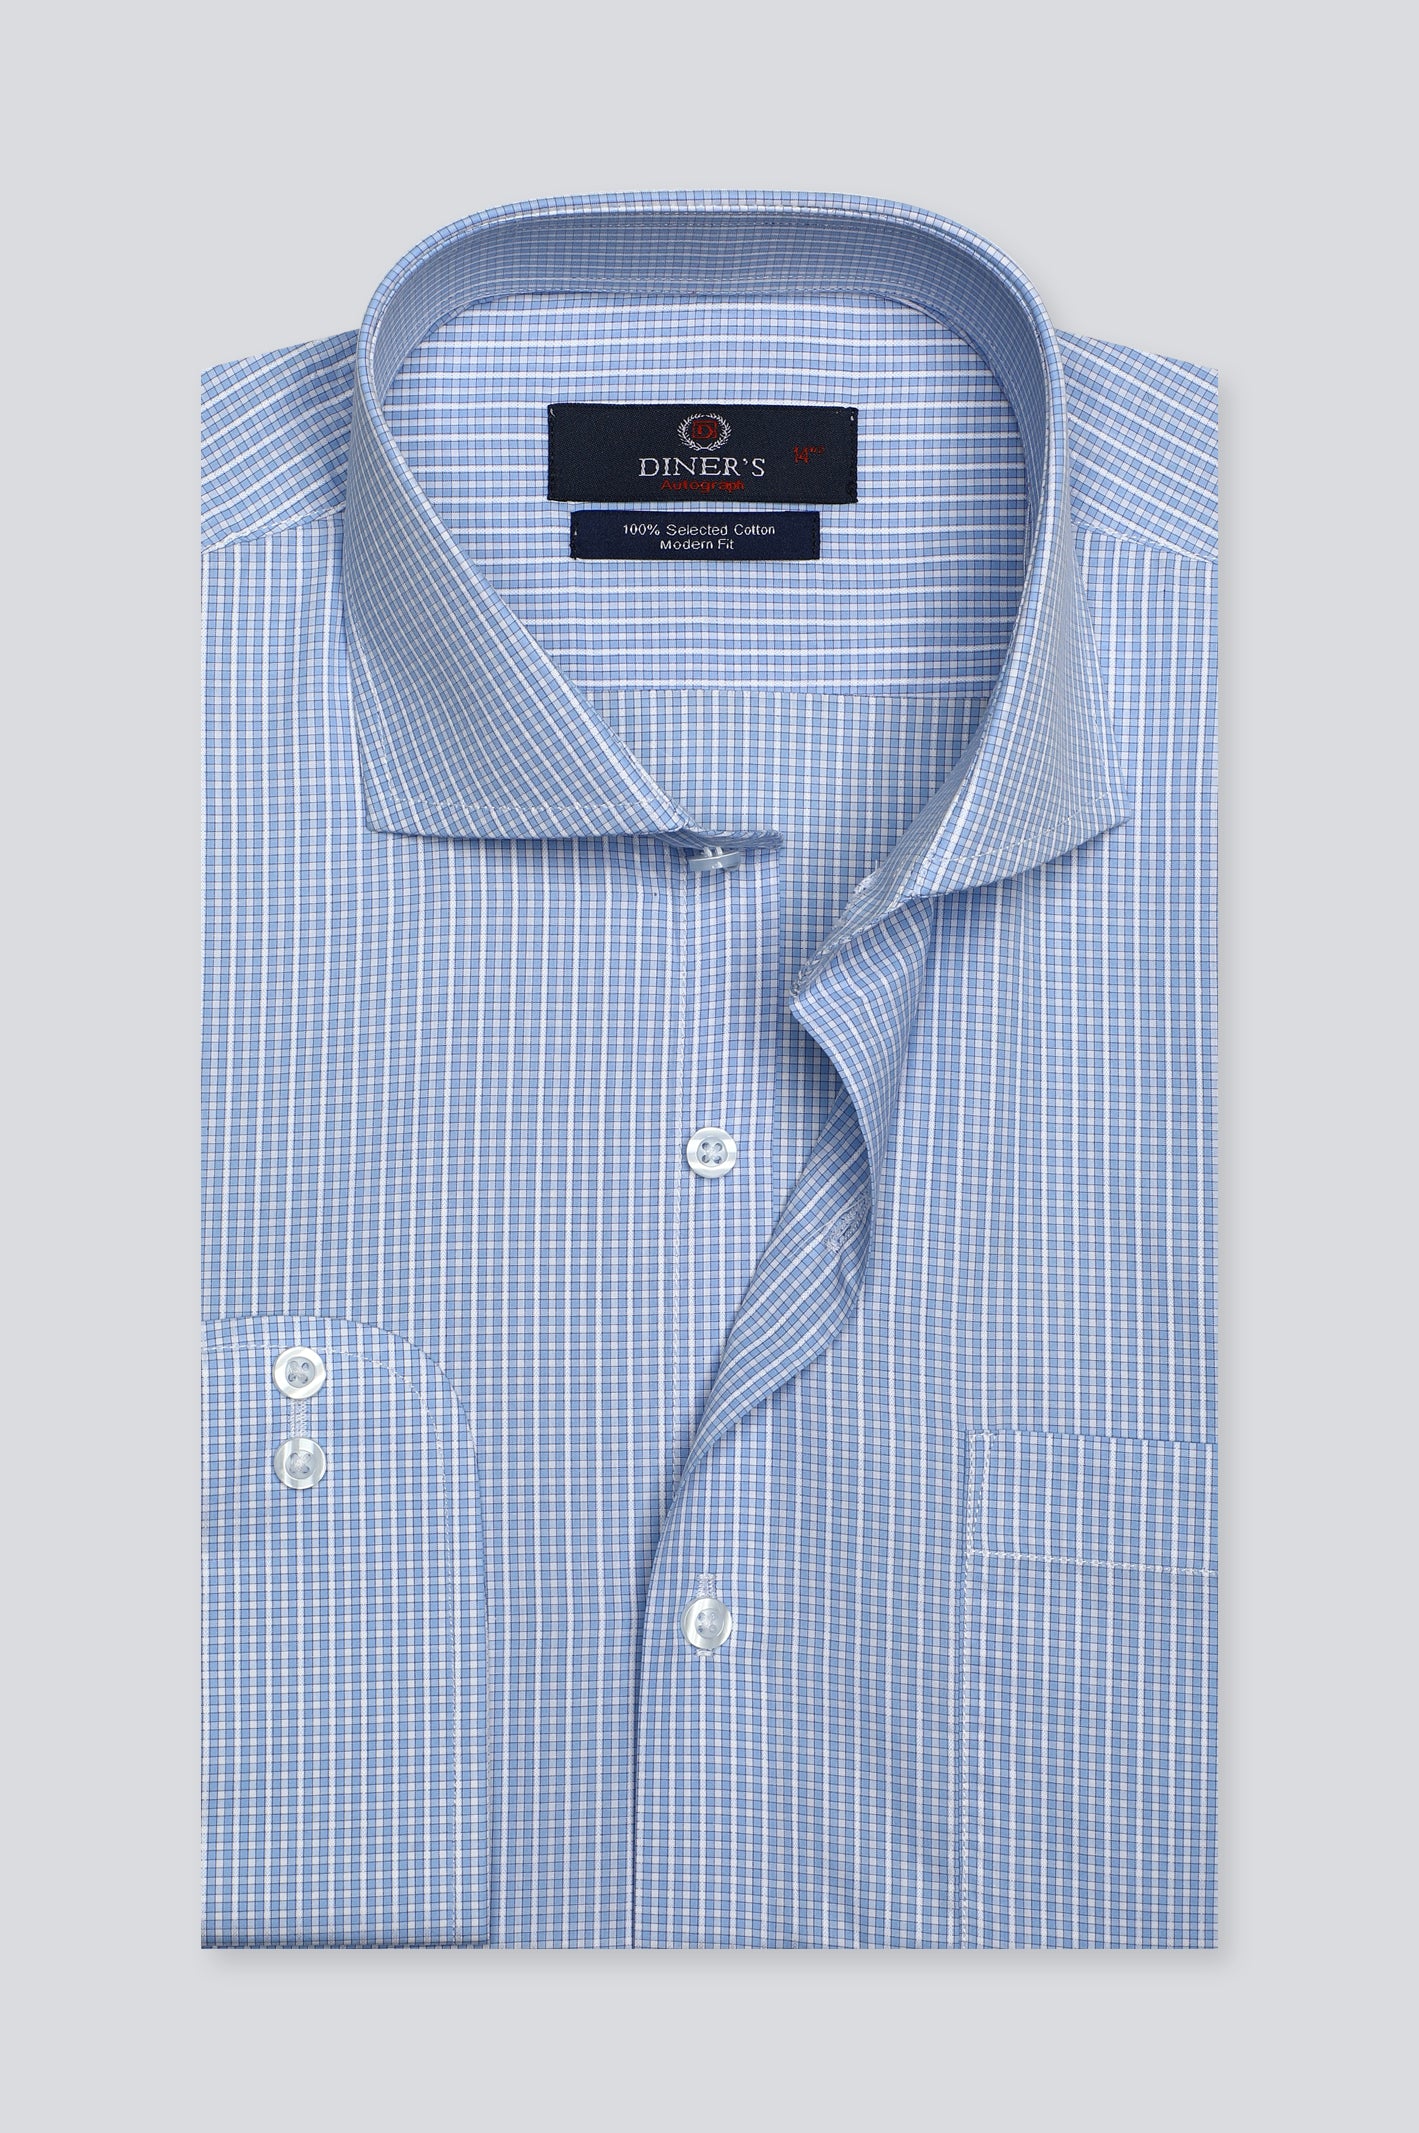 Light Blue Mini-Check Formal Autograph Shirt From Diners